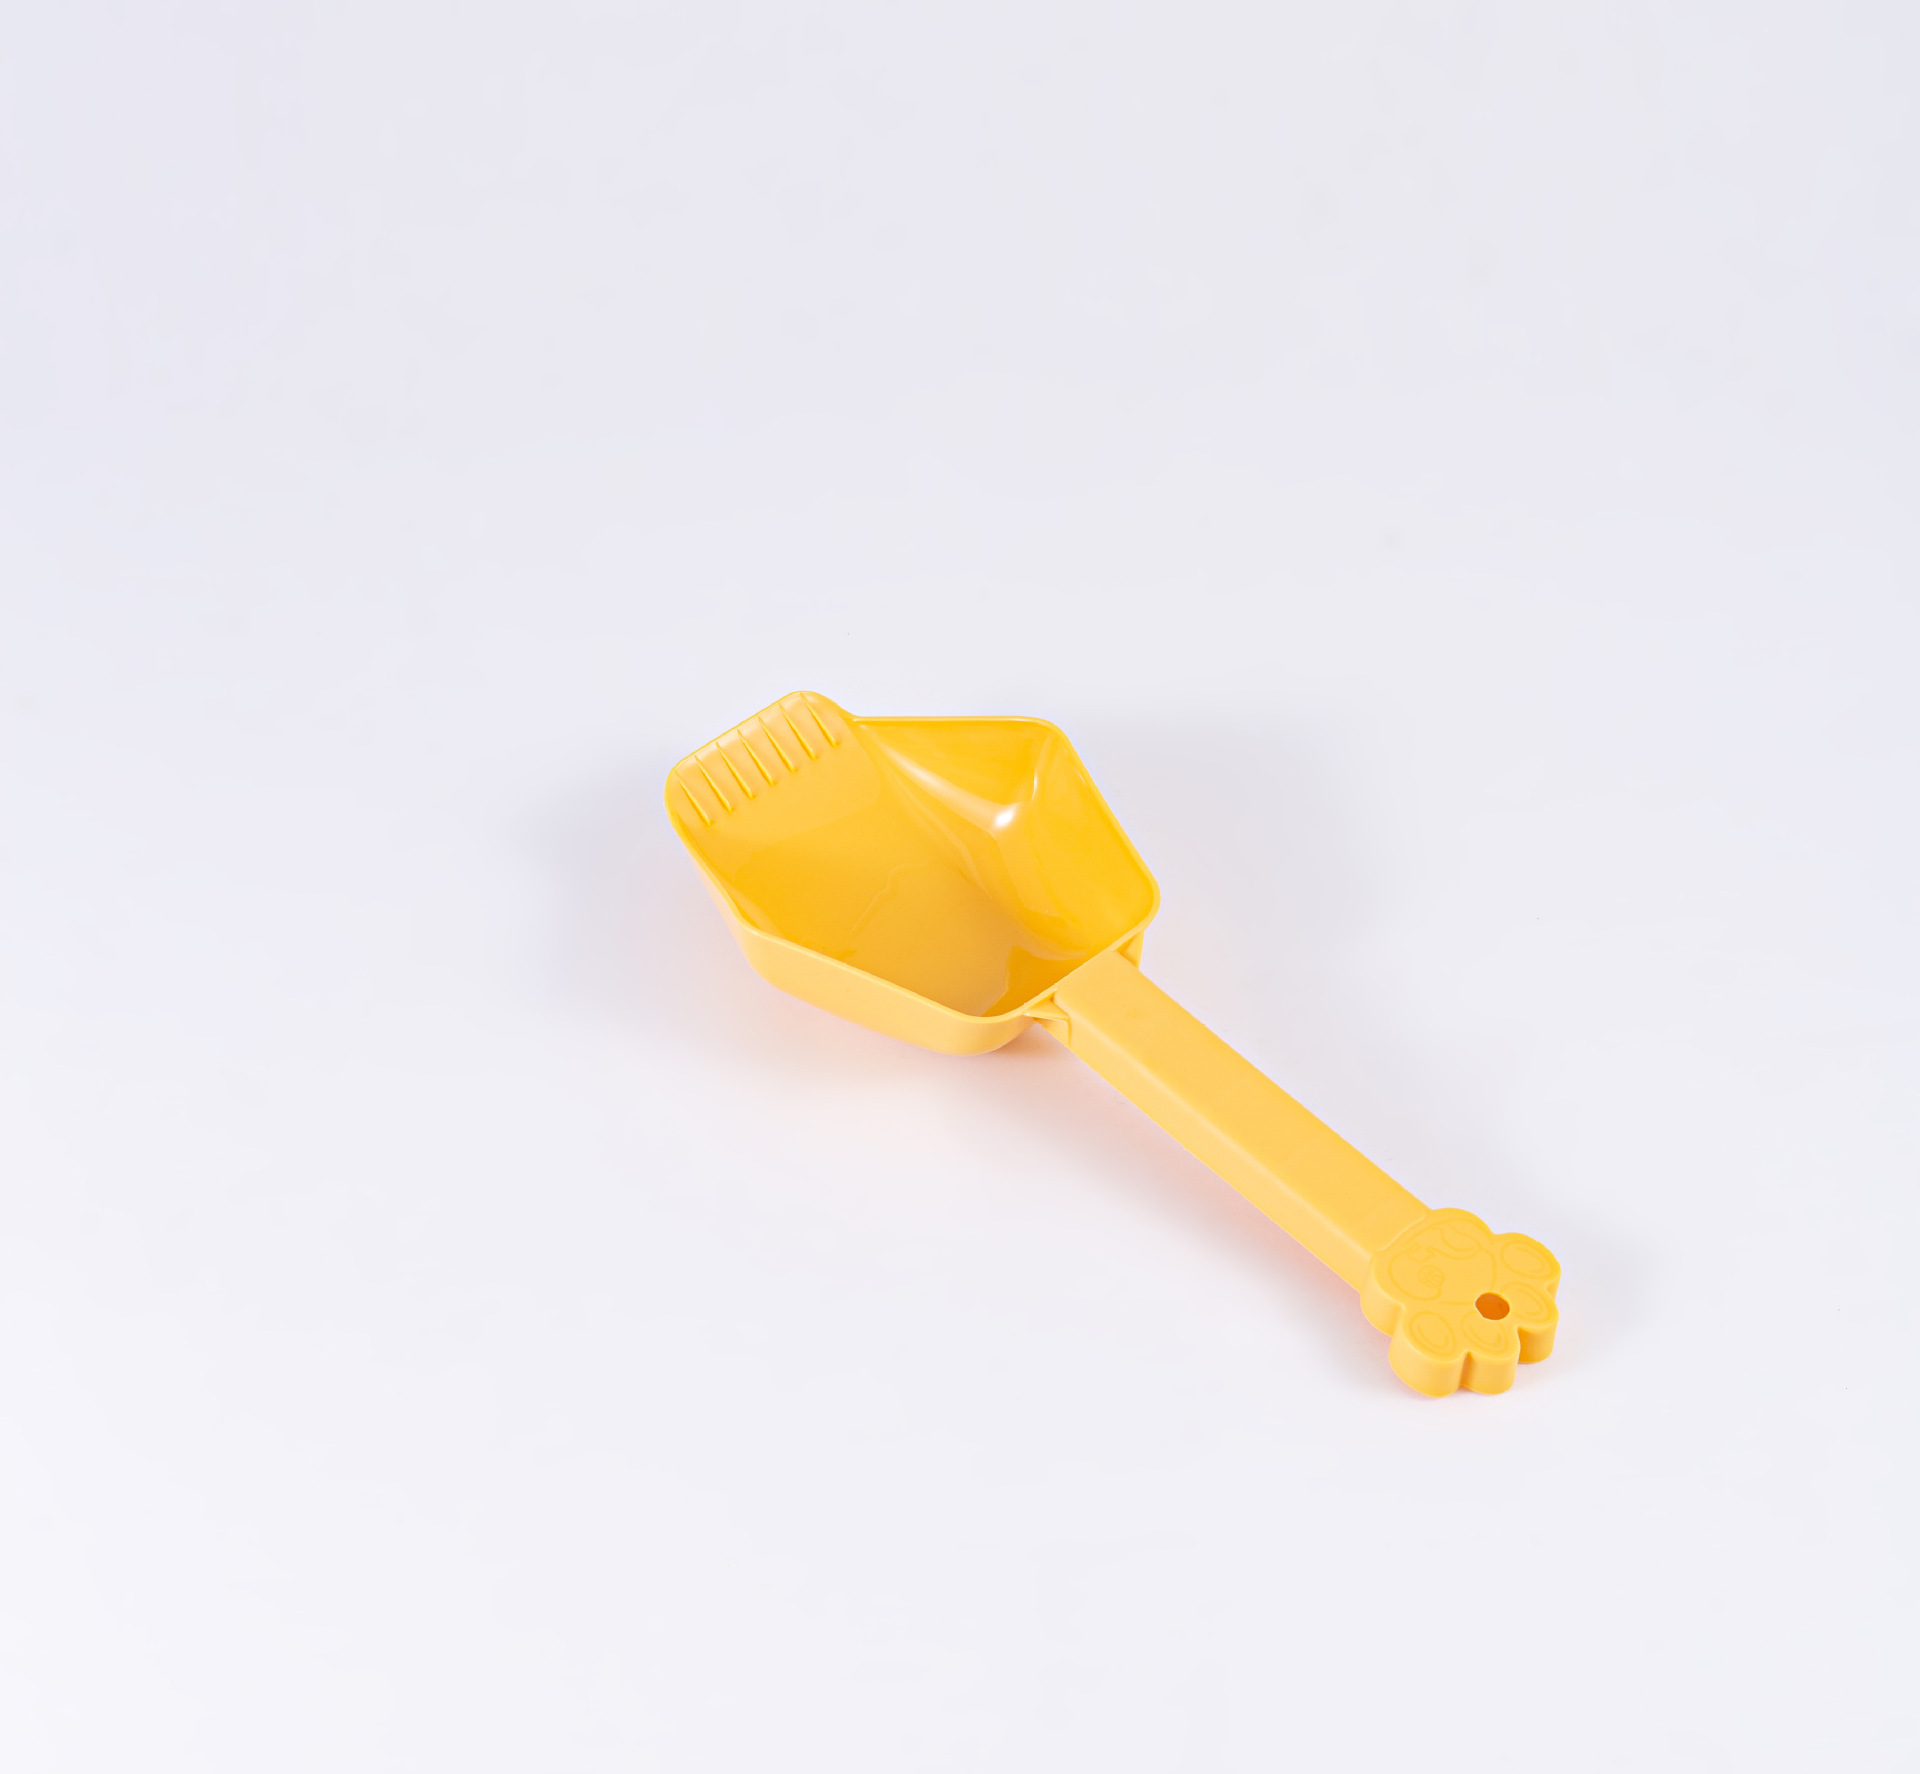 Cat Food Dog Food Pet Food Spoon Spoon Measuring Spoon Cat Cup Food Basin Bowl Measuring Cup with Scale Feeding Dog Measuring Supplies